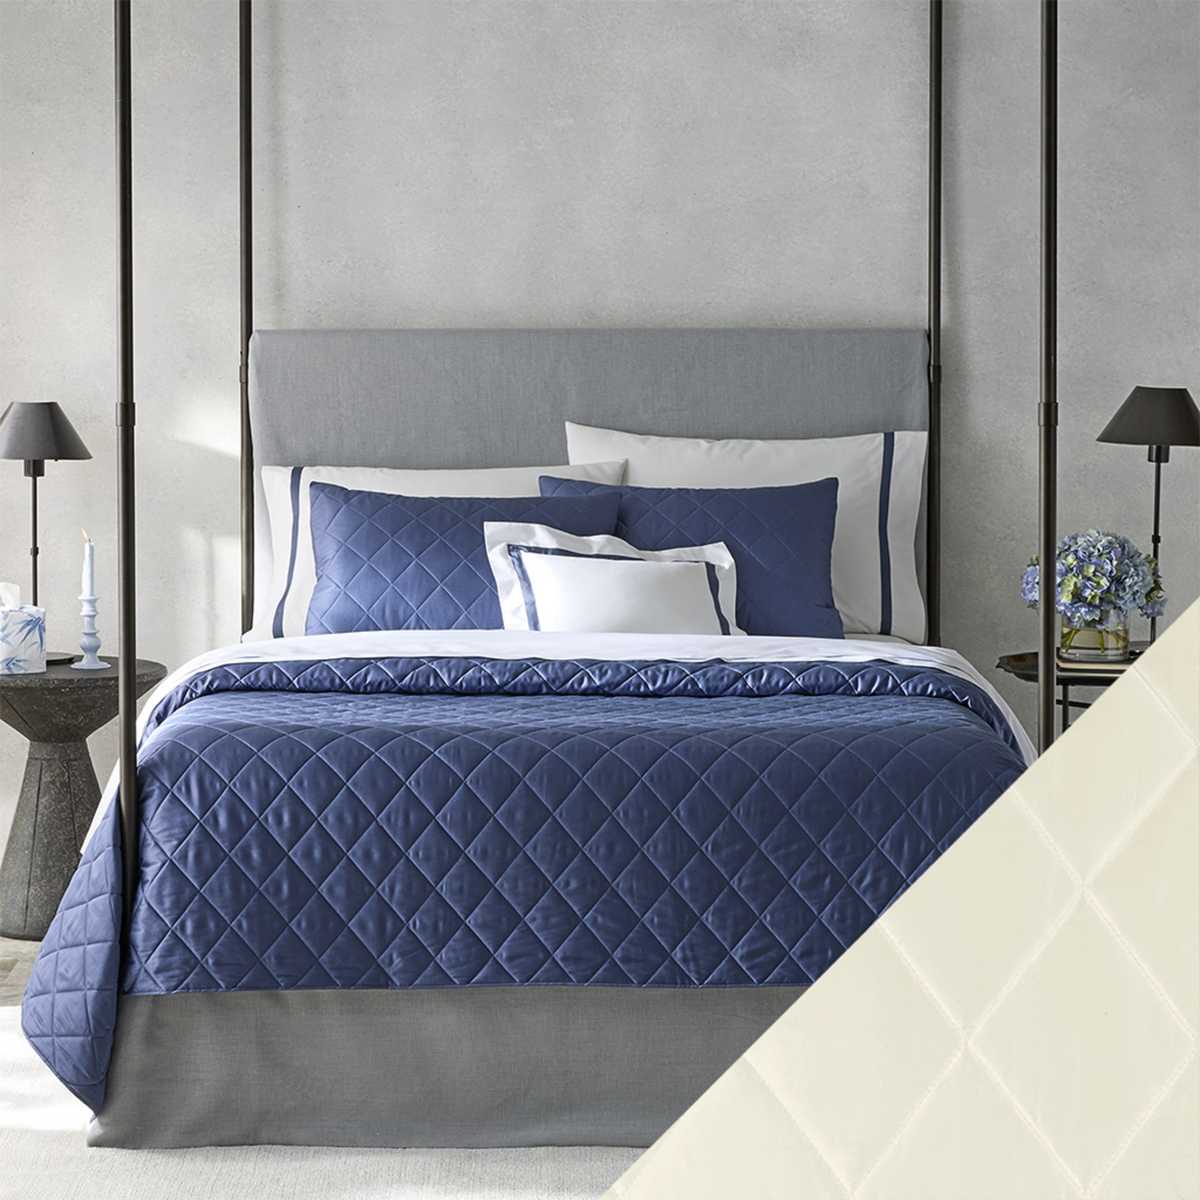 Matouk Nocturne Bedding Main Image with Swatch in Ivory